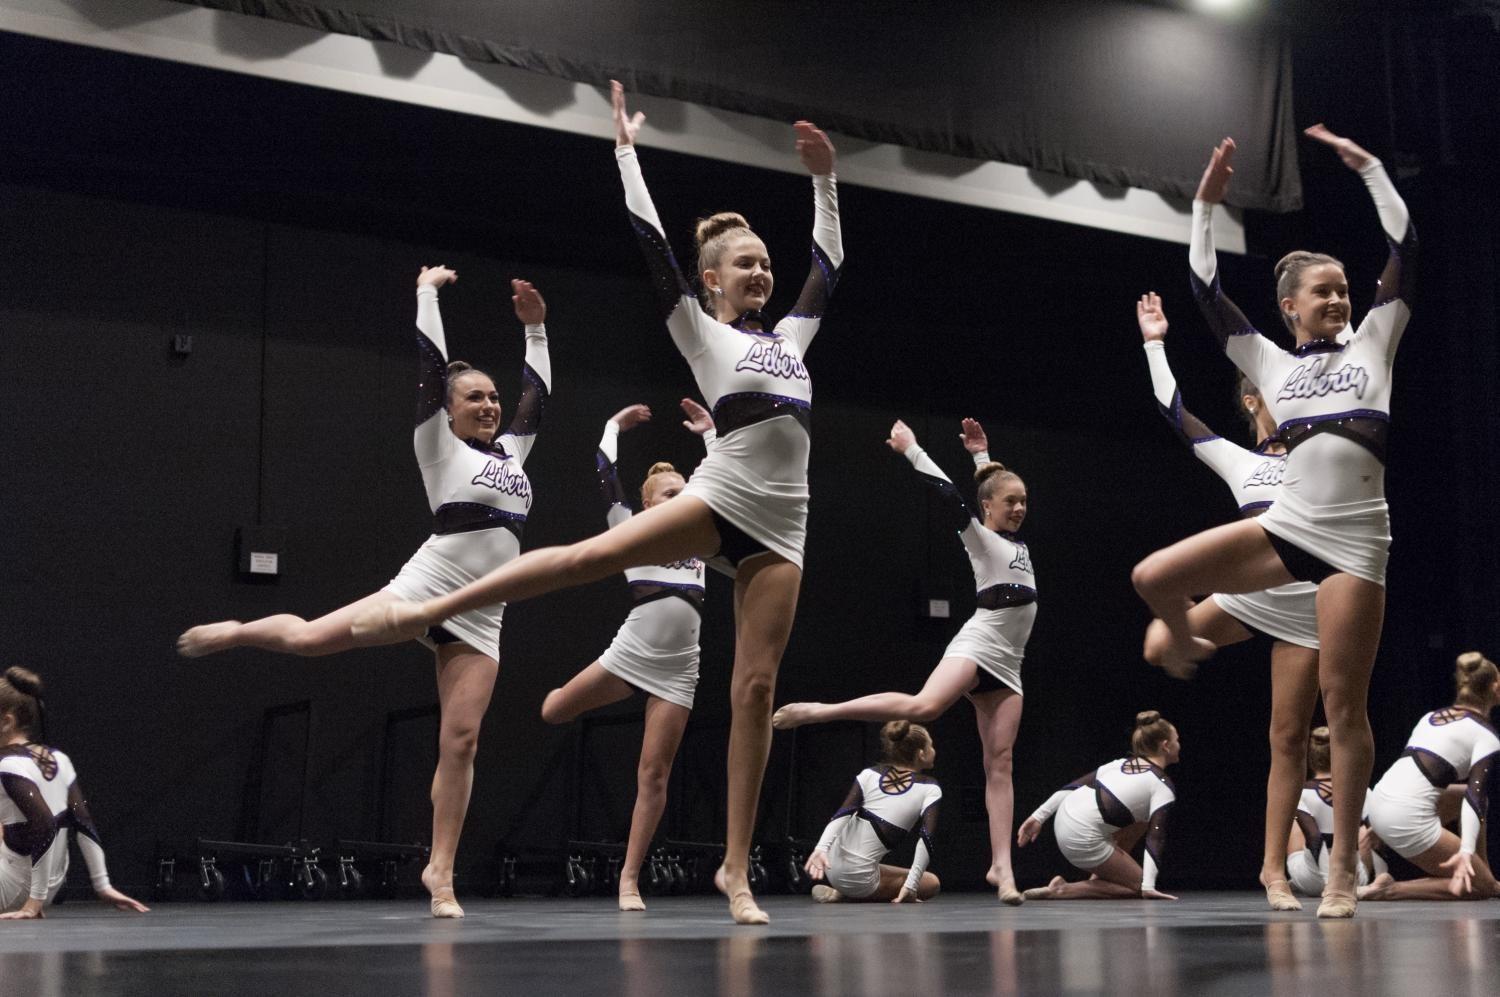 The Liberty Dance Team performs a routine in the auditorium, which seats up to 830 people, on Aug. 12 in North Liberty.